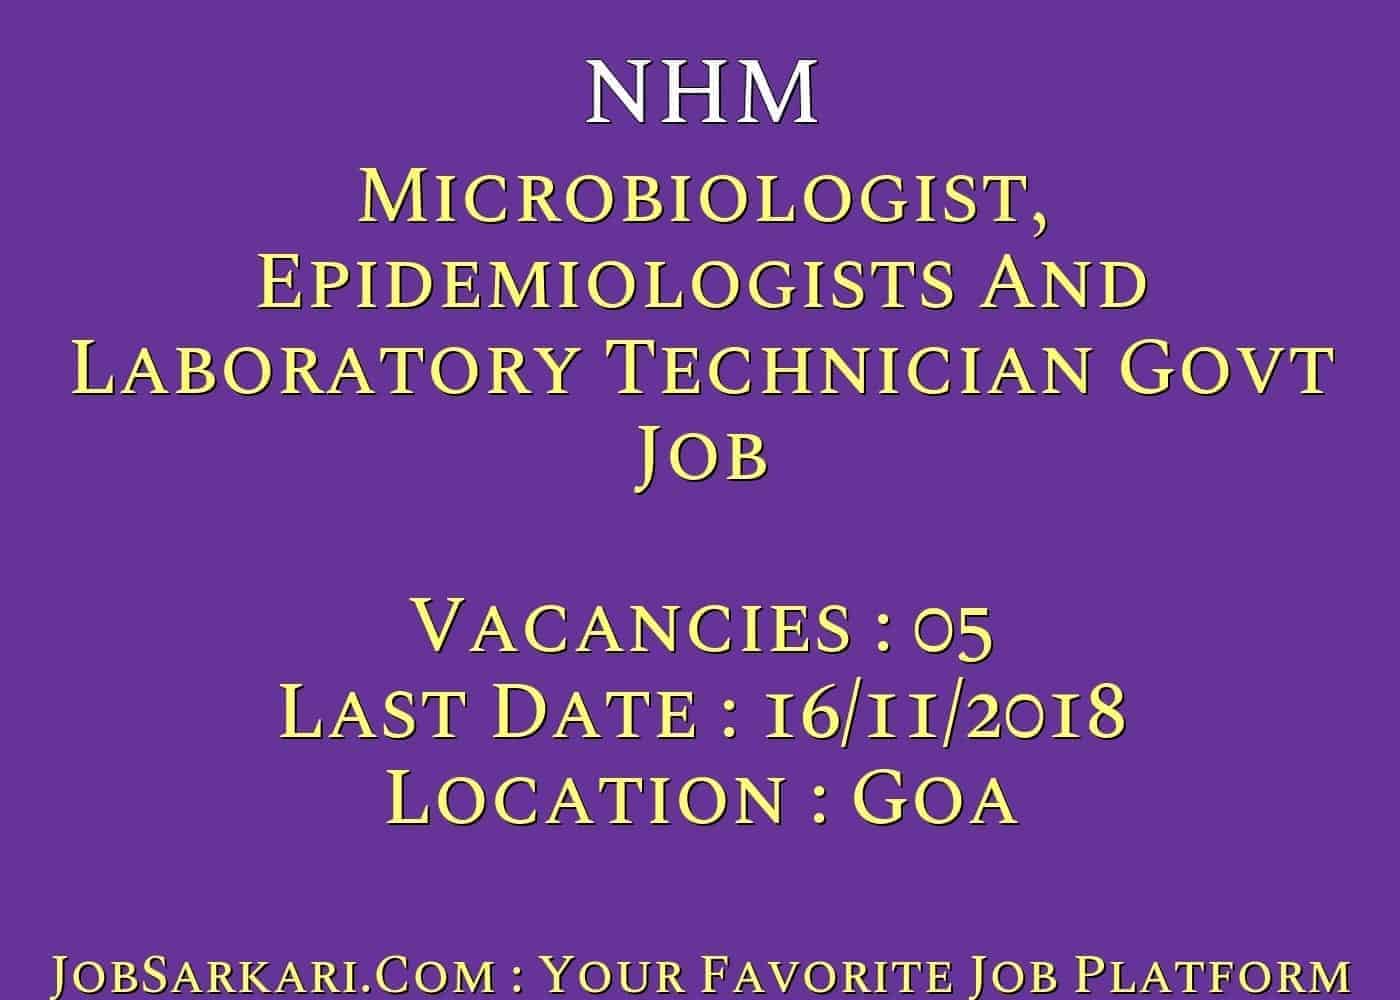 NHM Recruitment 2018 For Microbiologist, Epidemiologists And Laboratory Technician Govt Job